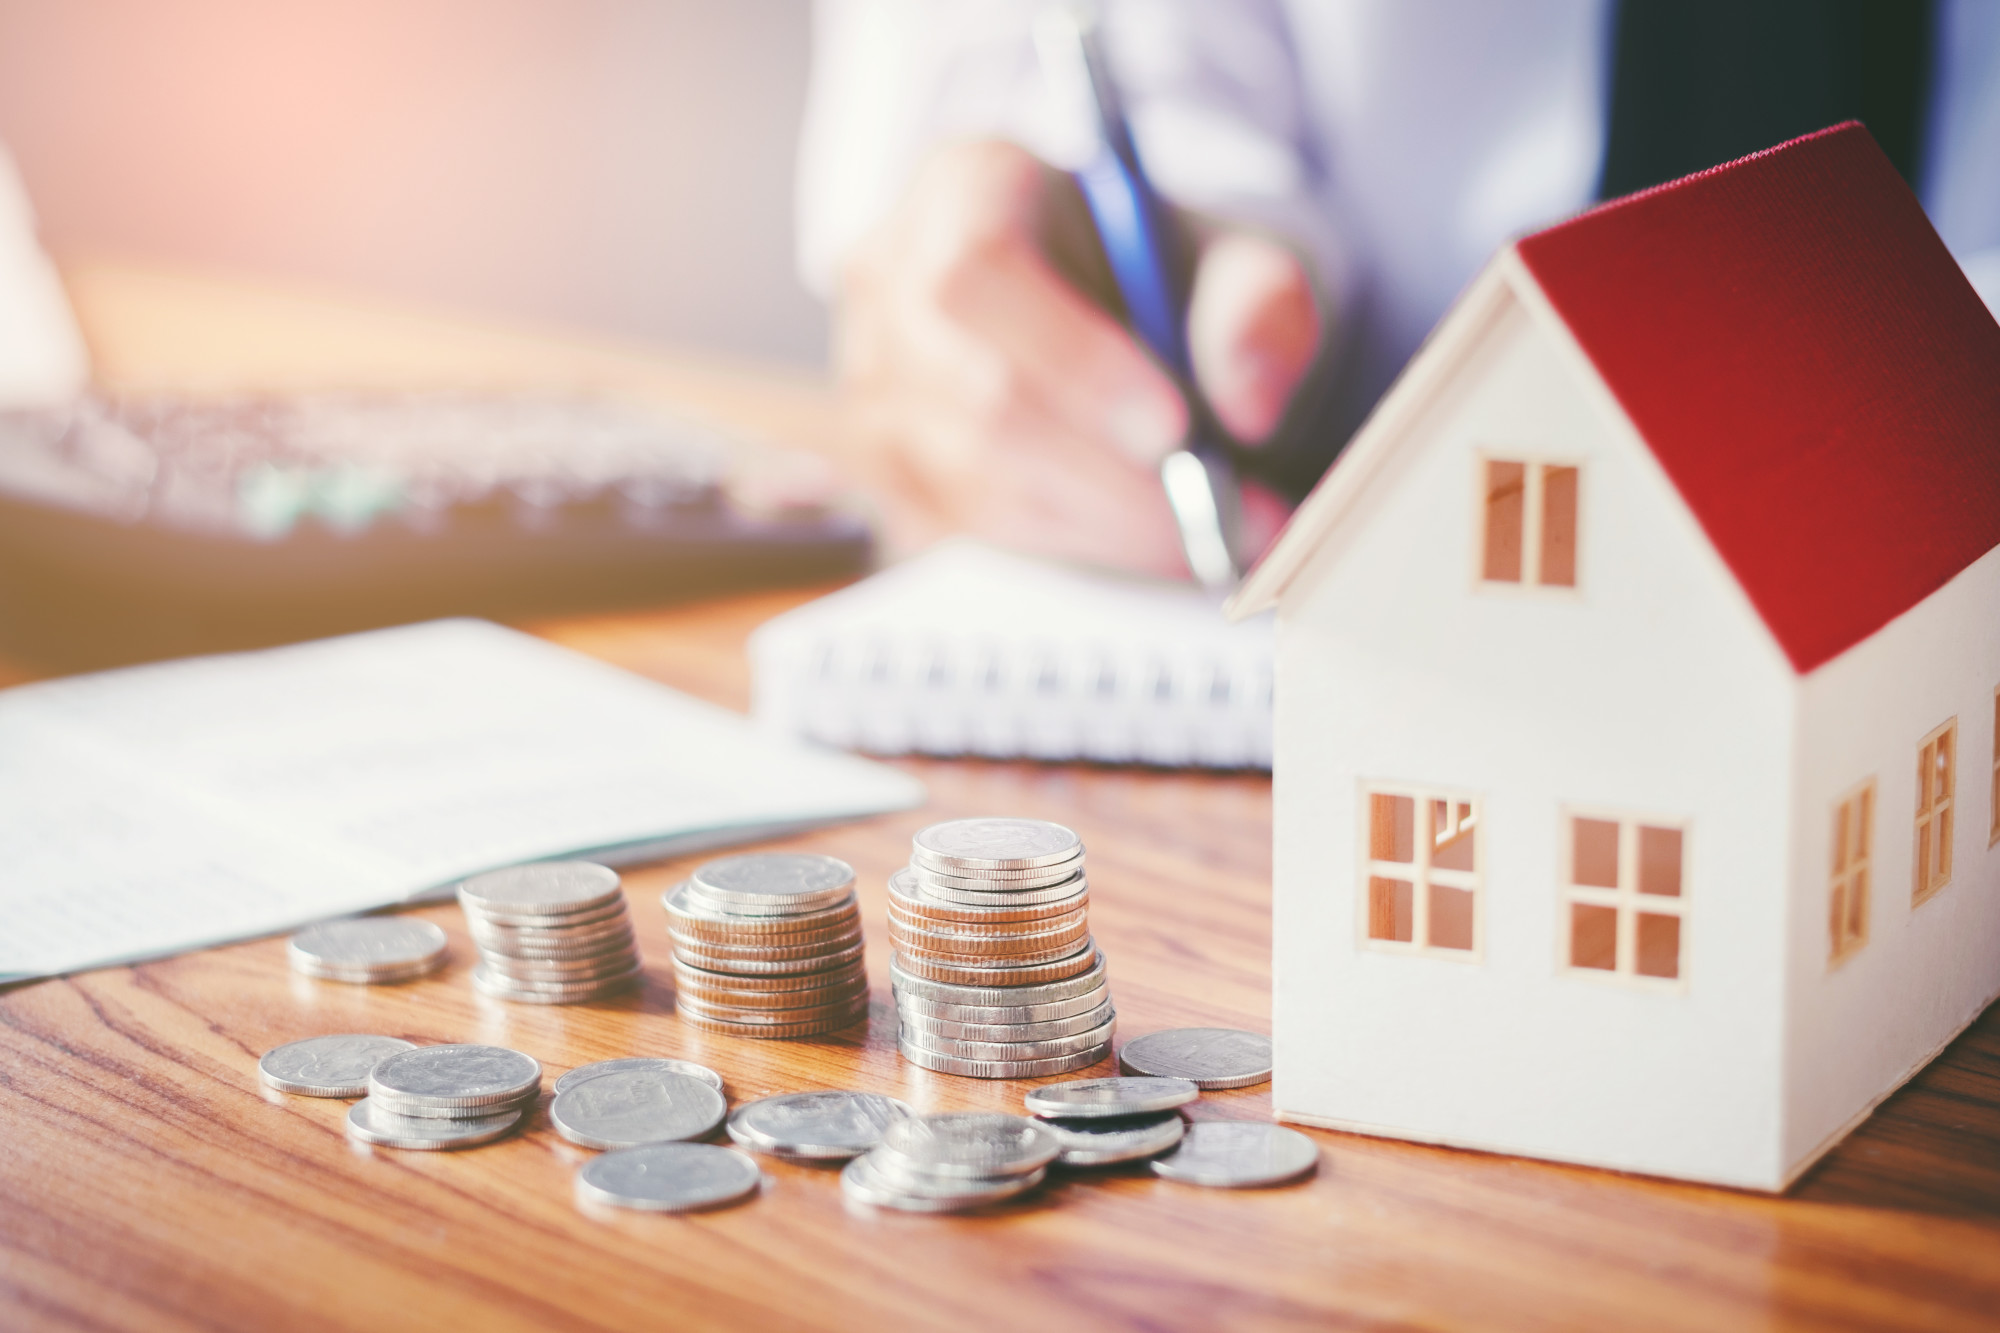 If you're preparing on taking the leap towards home ownership, click here to explore just how much you should save for a home down payment.